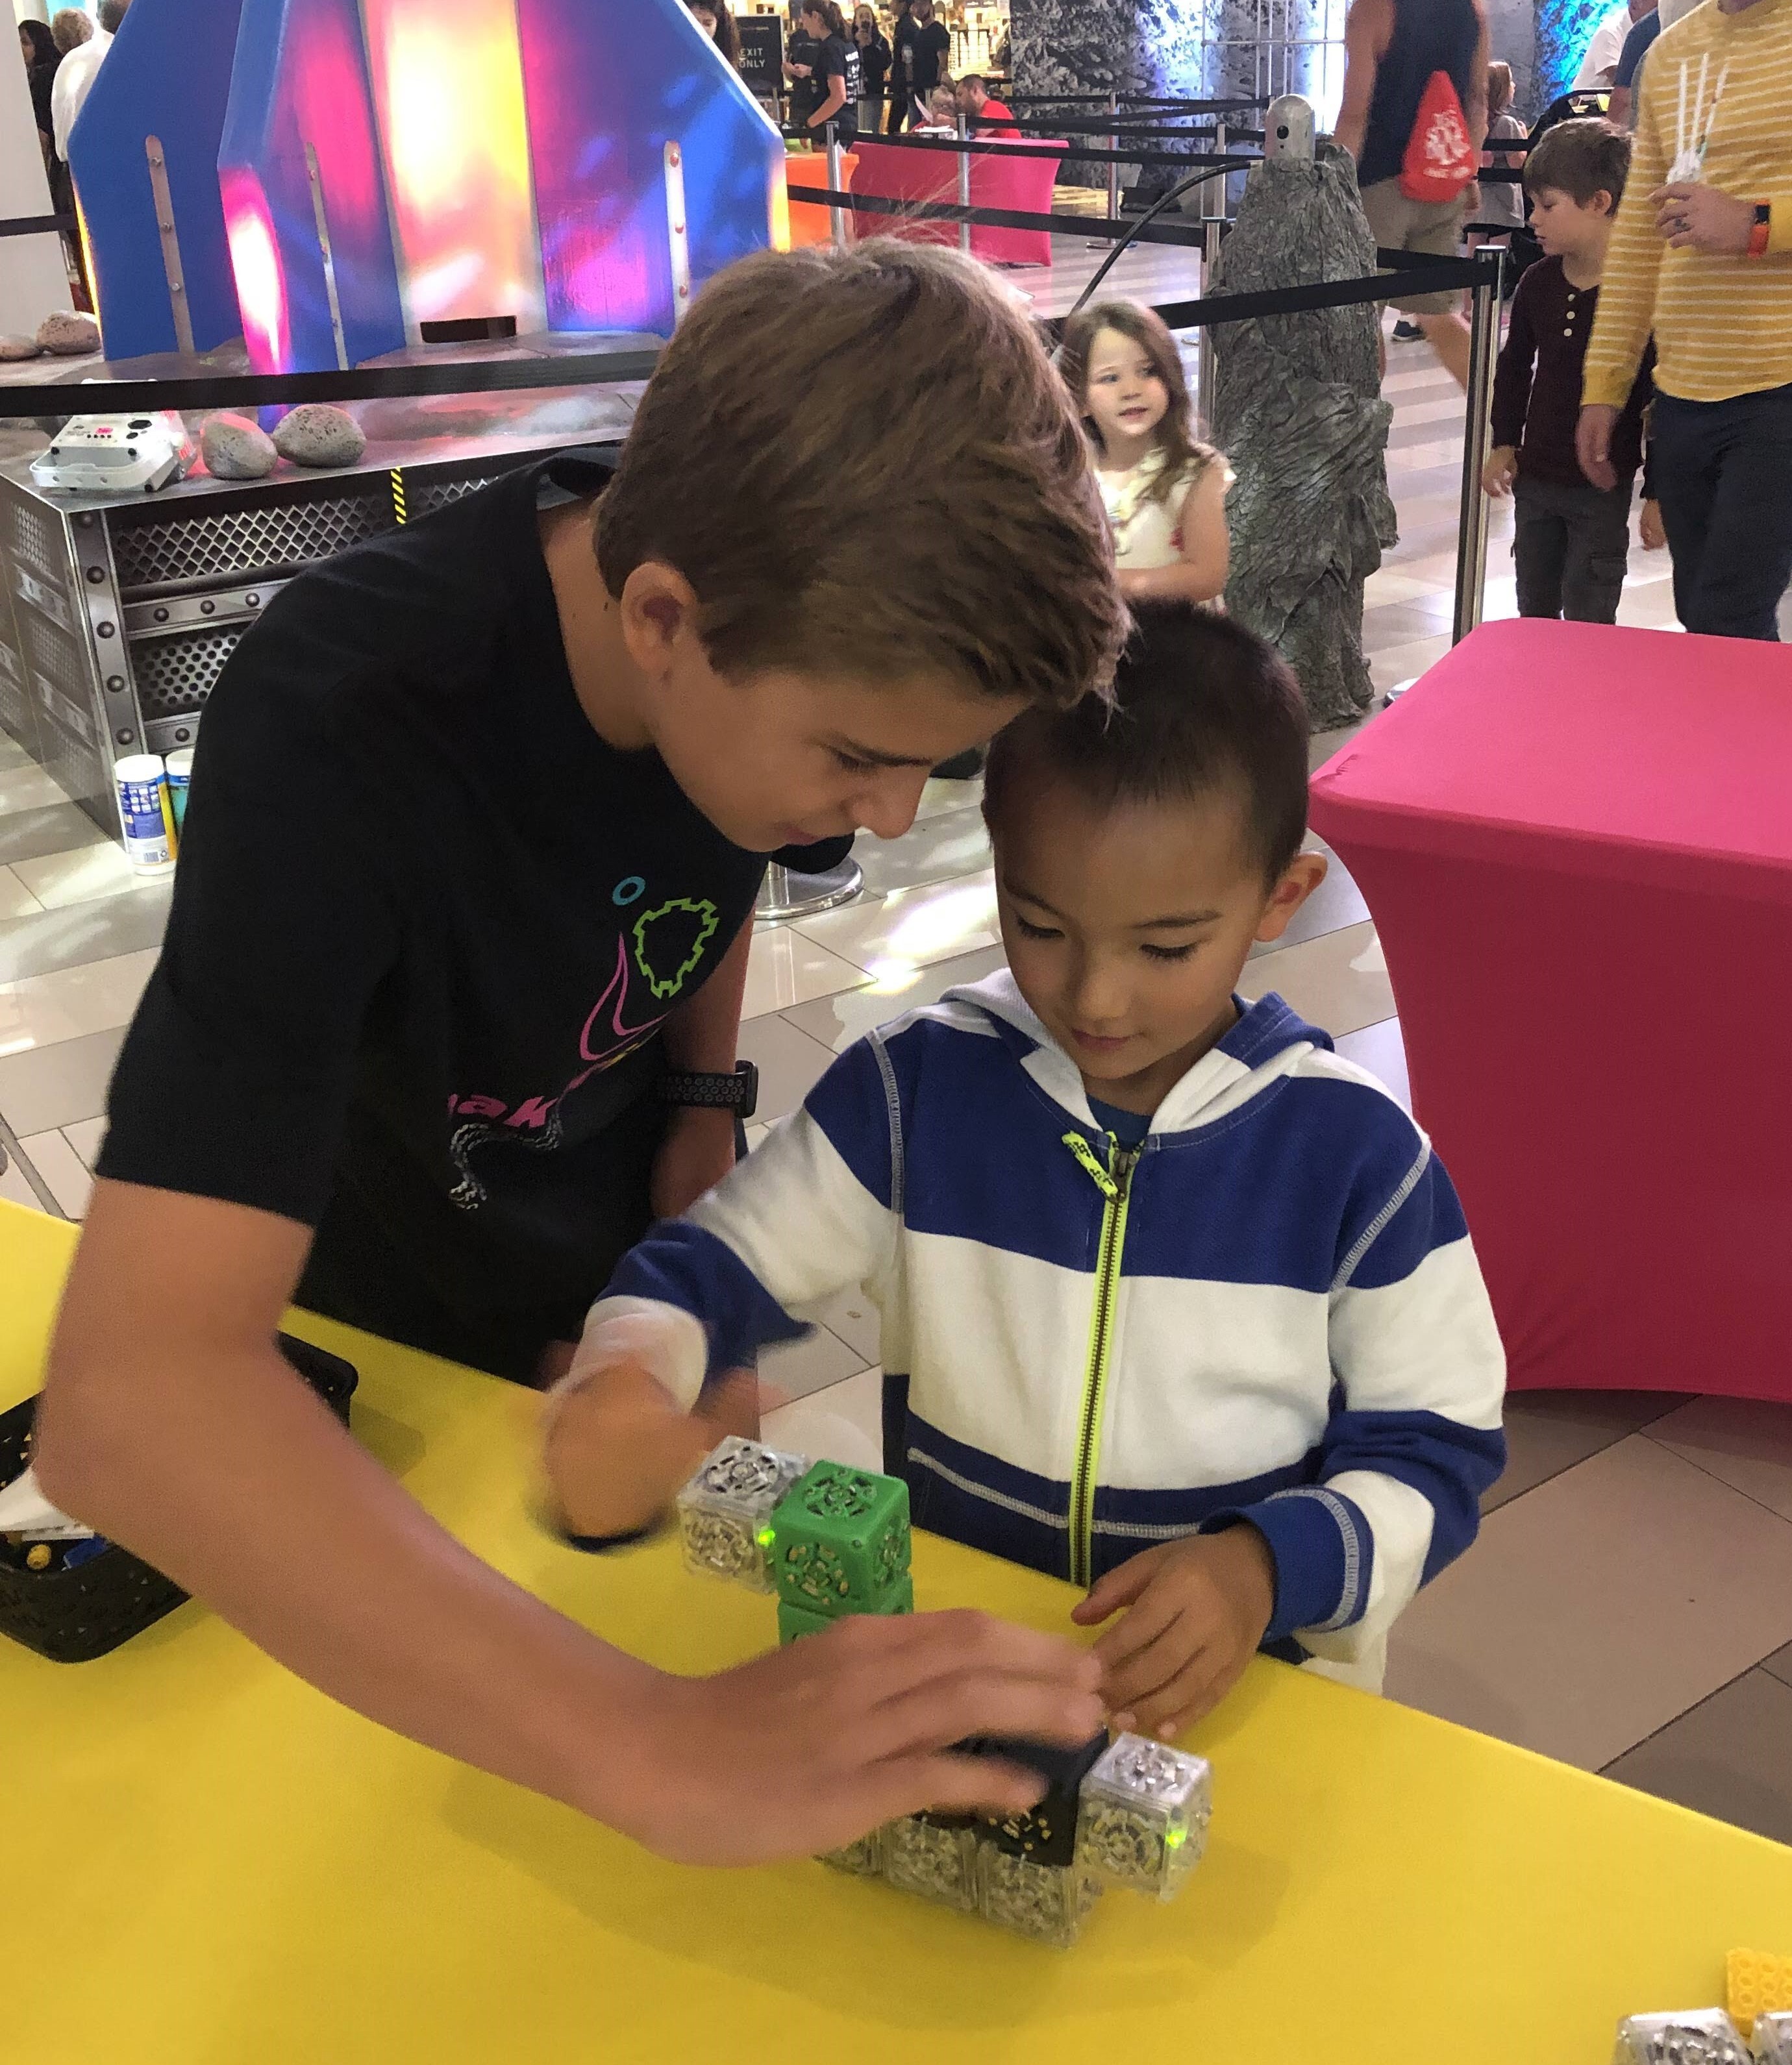 Teaching STEM with Robotics Tools that Grow with Kids – Blog